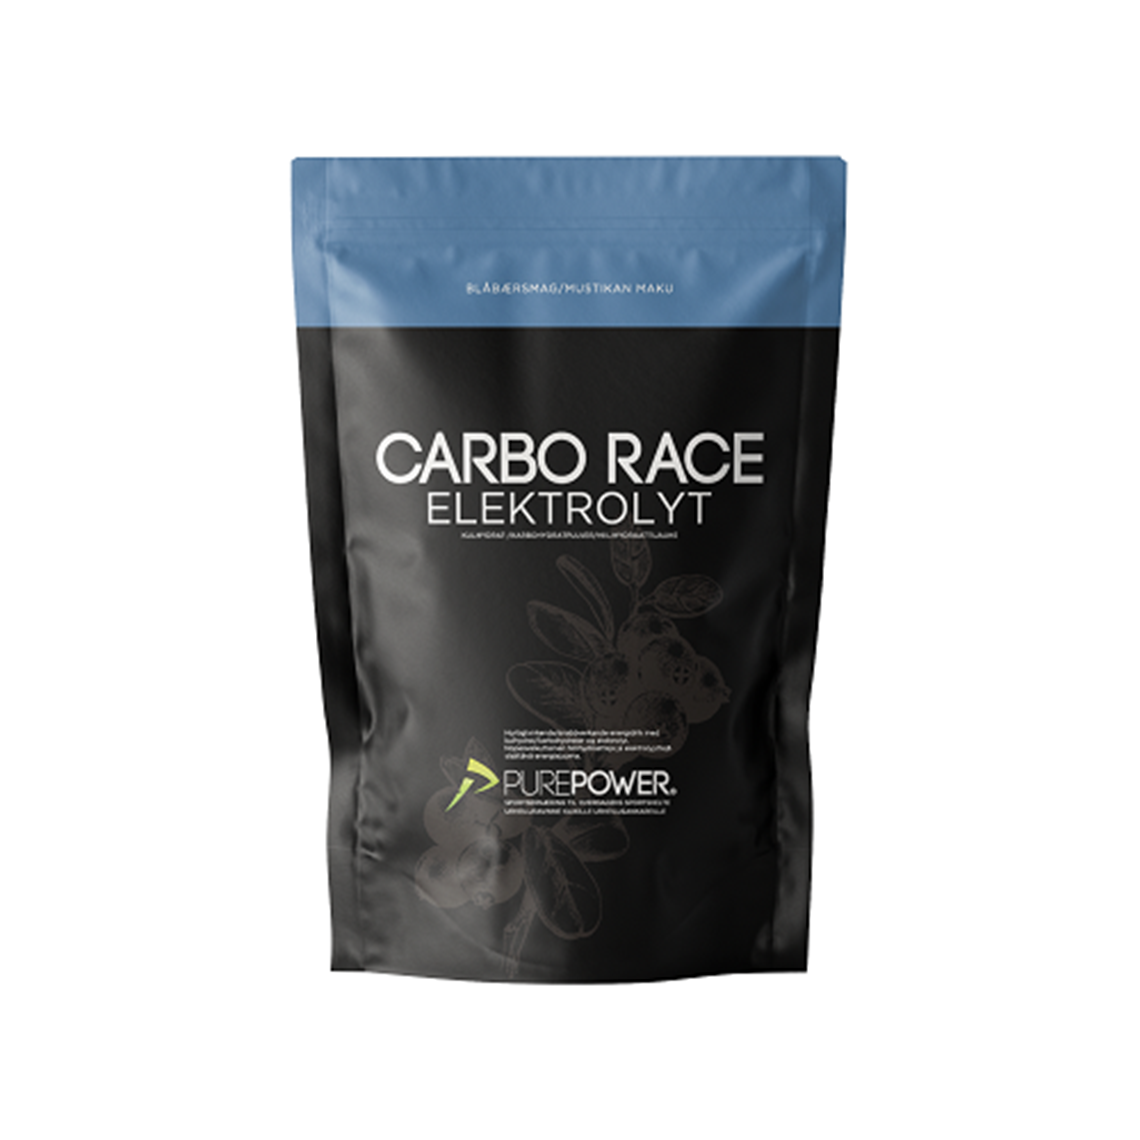 Carbo Race Electrolyte Blueberry 1kg